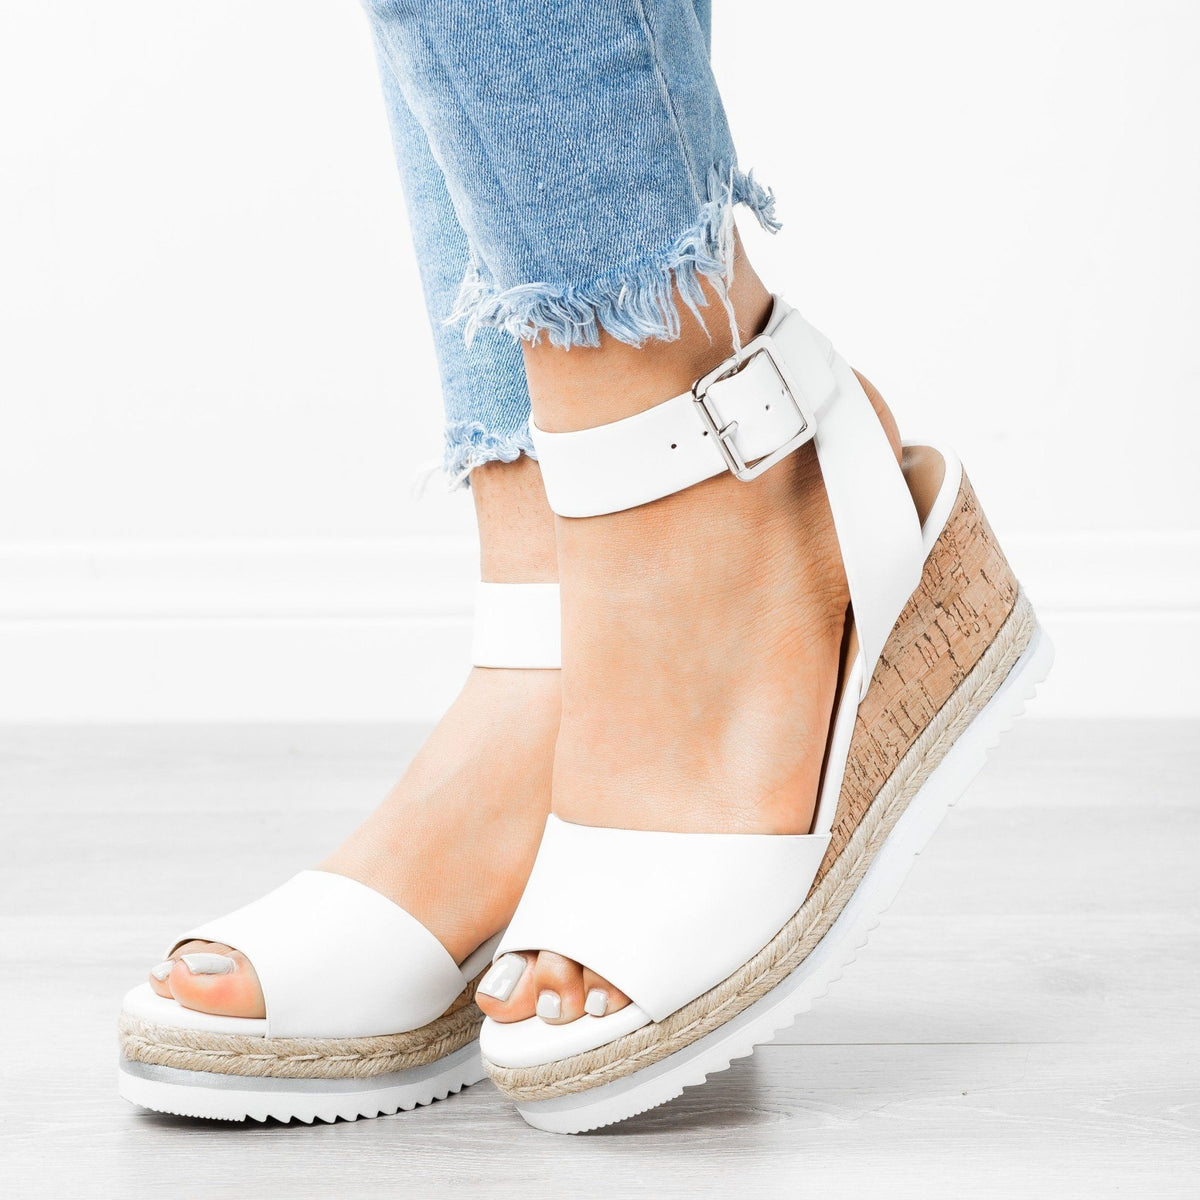 city classified wedges